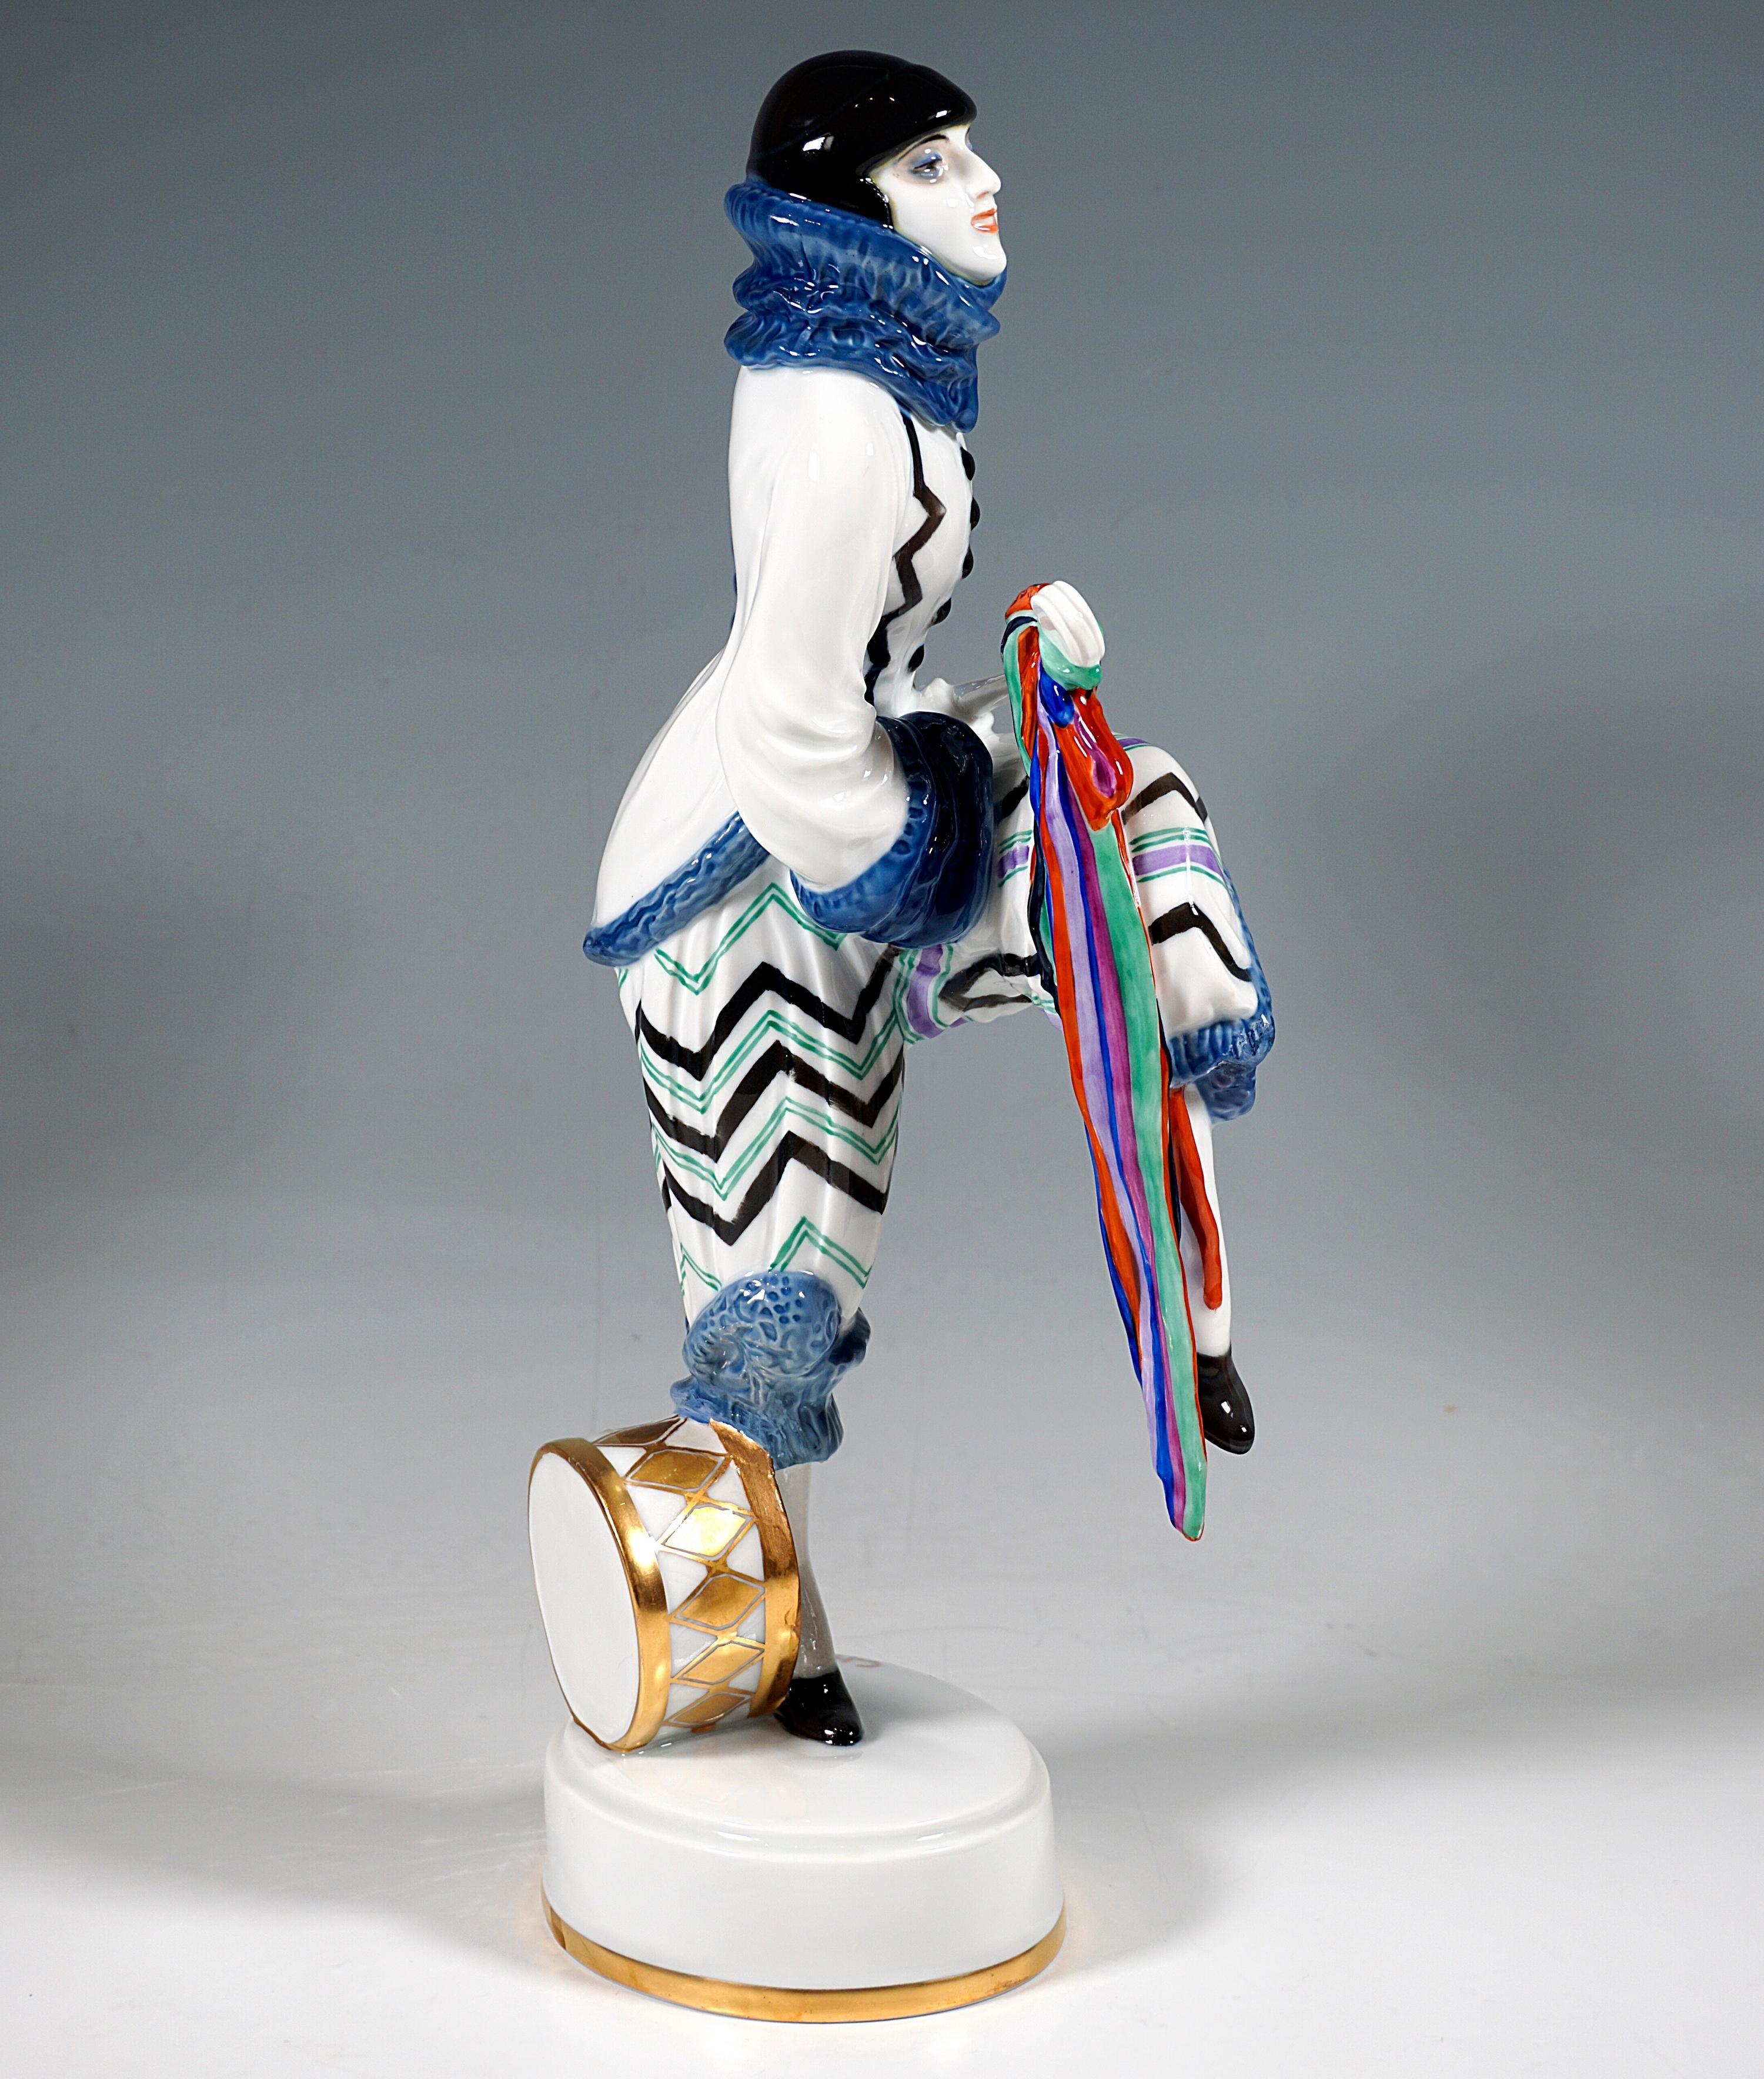 Very rare Porcelaine Figurine after the dancer Lena Amsel:
Dancer in an exotic Pierrot costume with a zigzag pattern, with large flounced cuffs and matching high collar, posing in marching step with one leg raised and playing a lute with a long